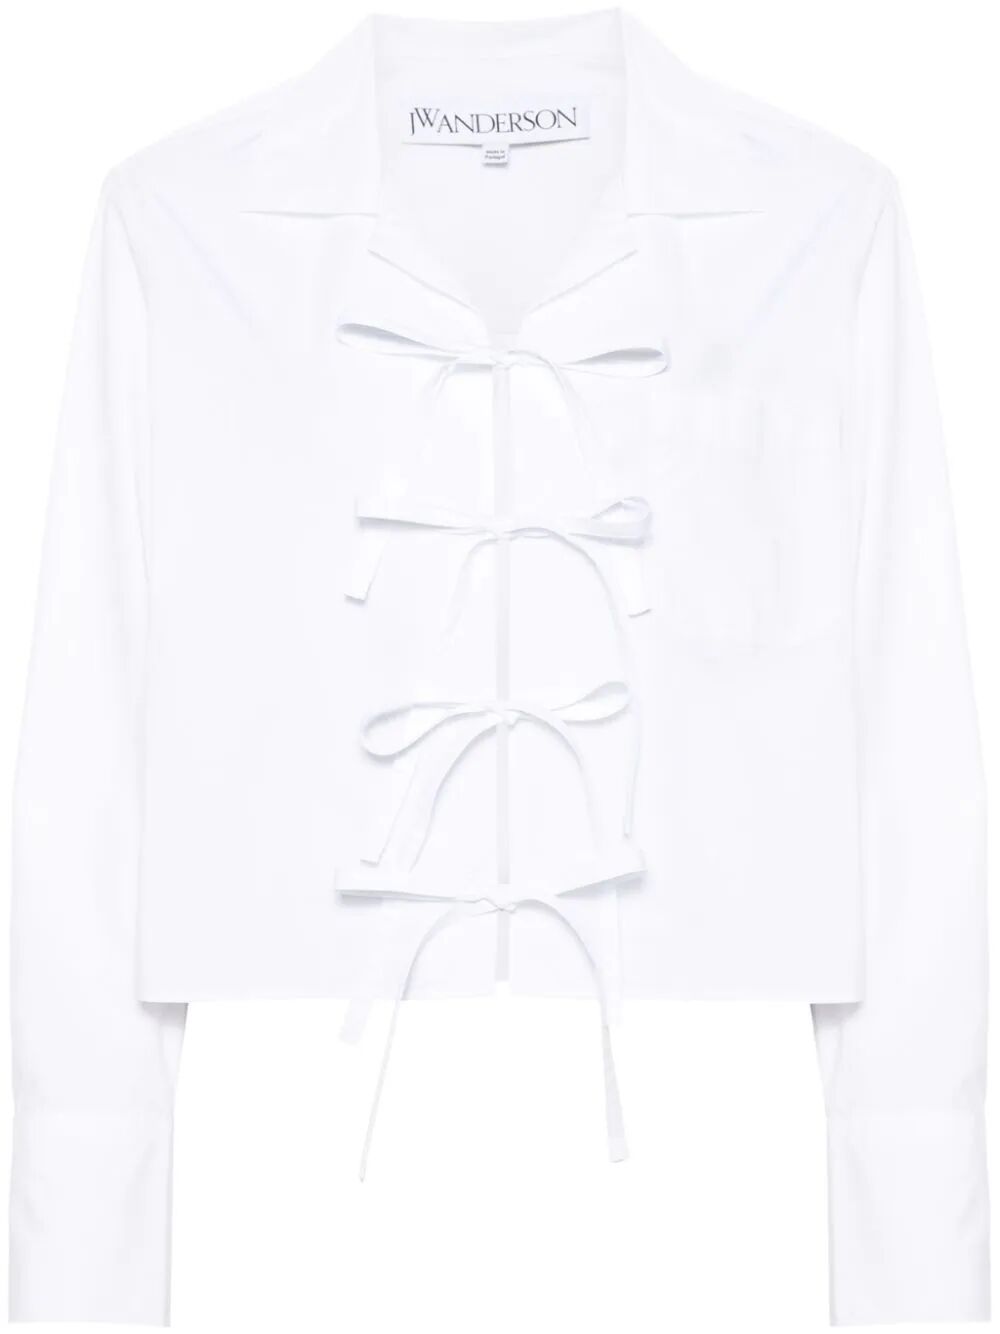 JW ANDERSON-BOW TIE CROPPED SHIRT-SH0312 PG1090 1